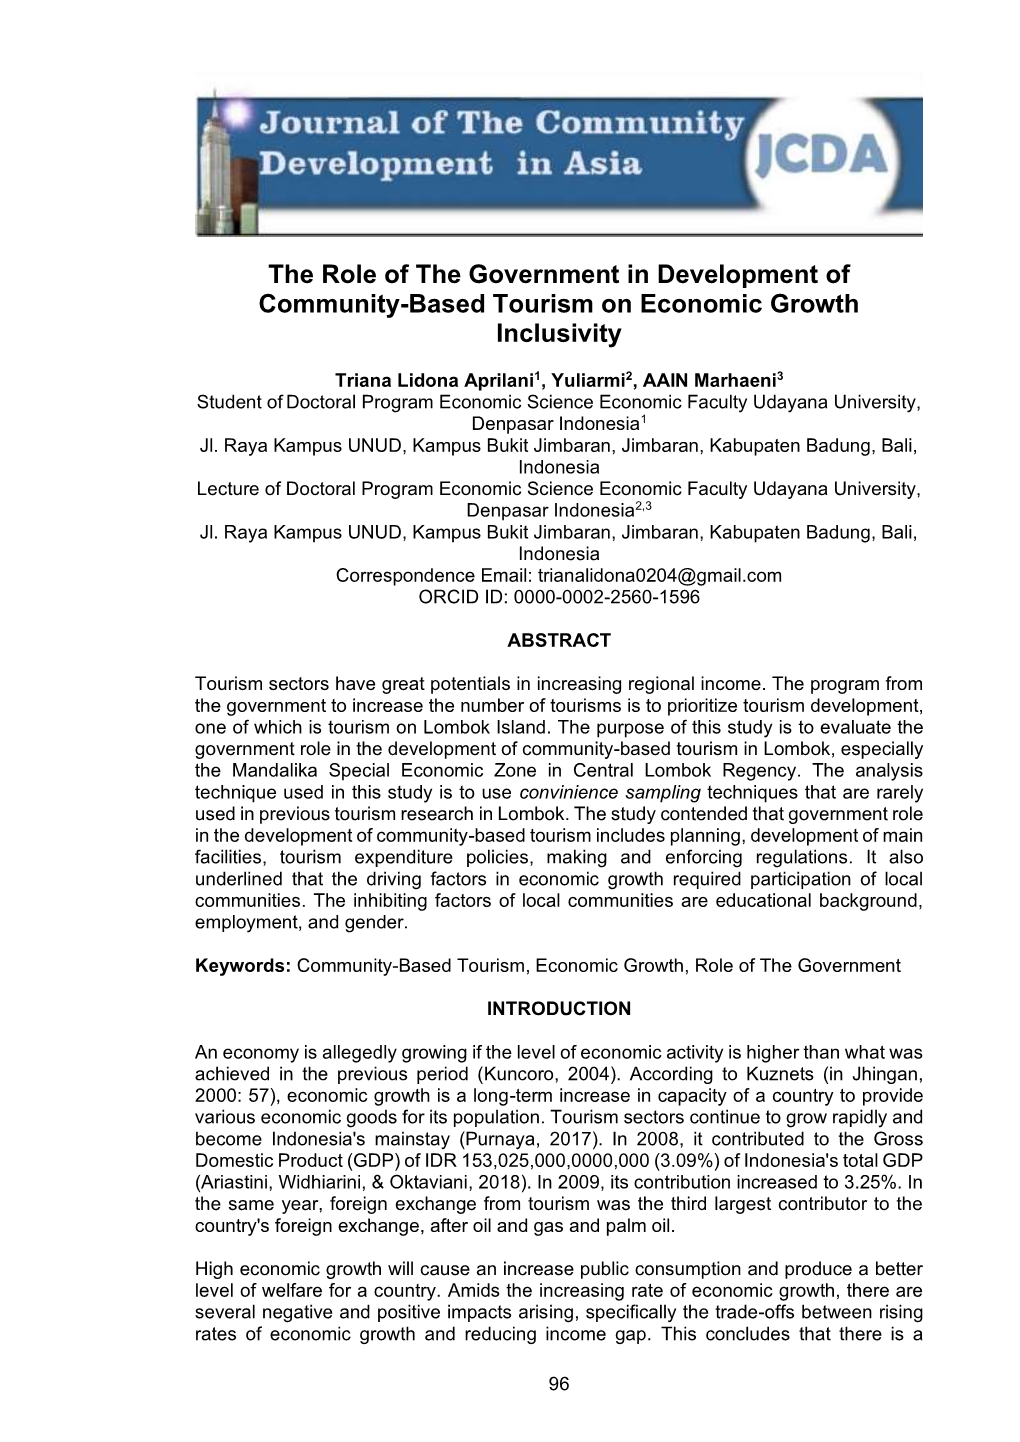 The Role of the Government in Development of Community-Based Tourism on Economic Growth Inclusivity